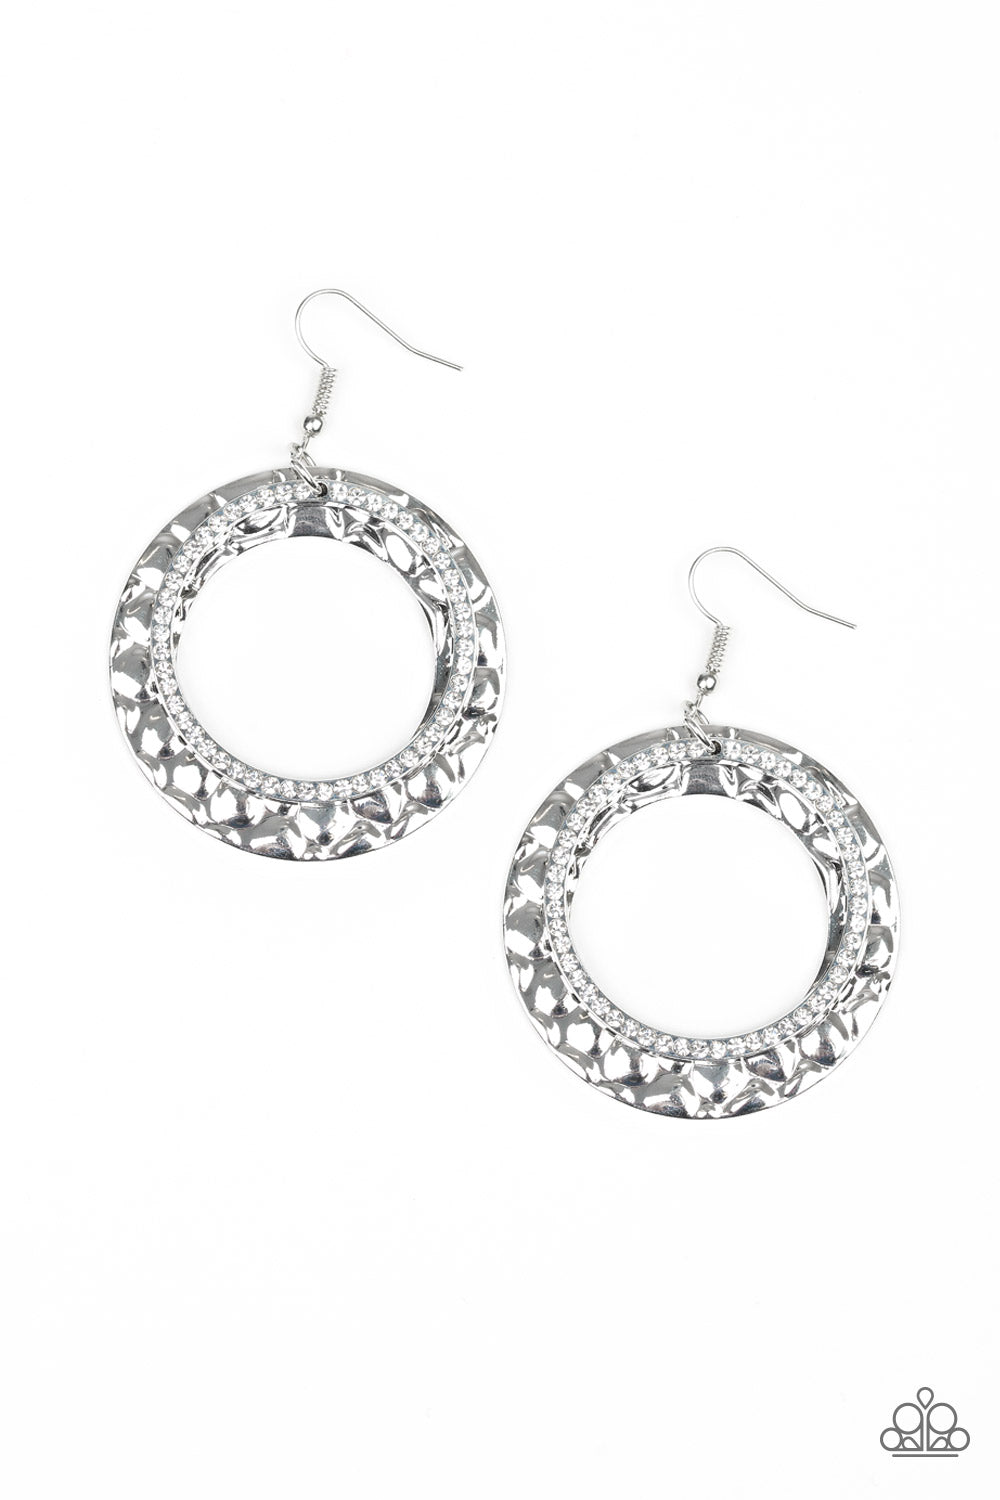 Cinematic Shimmer White Earring - Paparazzi Accessories Item #E108 Encrusted in glassy white rhinestones, a glittery silver hoop links with a thick silver hoop embossed in metallic pebble-like patterns, creating a refined lure. Earring attaches to a standard fishhook fitting. All Paparazzi Accessories are lead free and nickel free!  Sold as one pair of earrings.